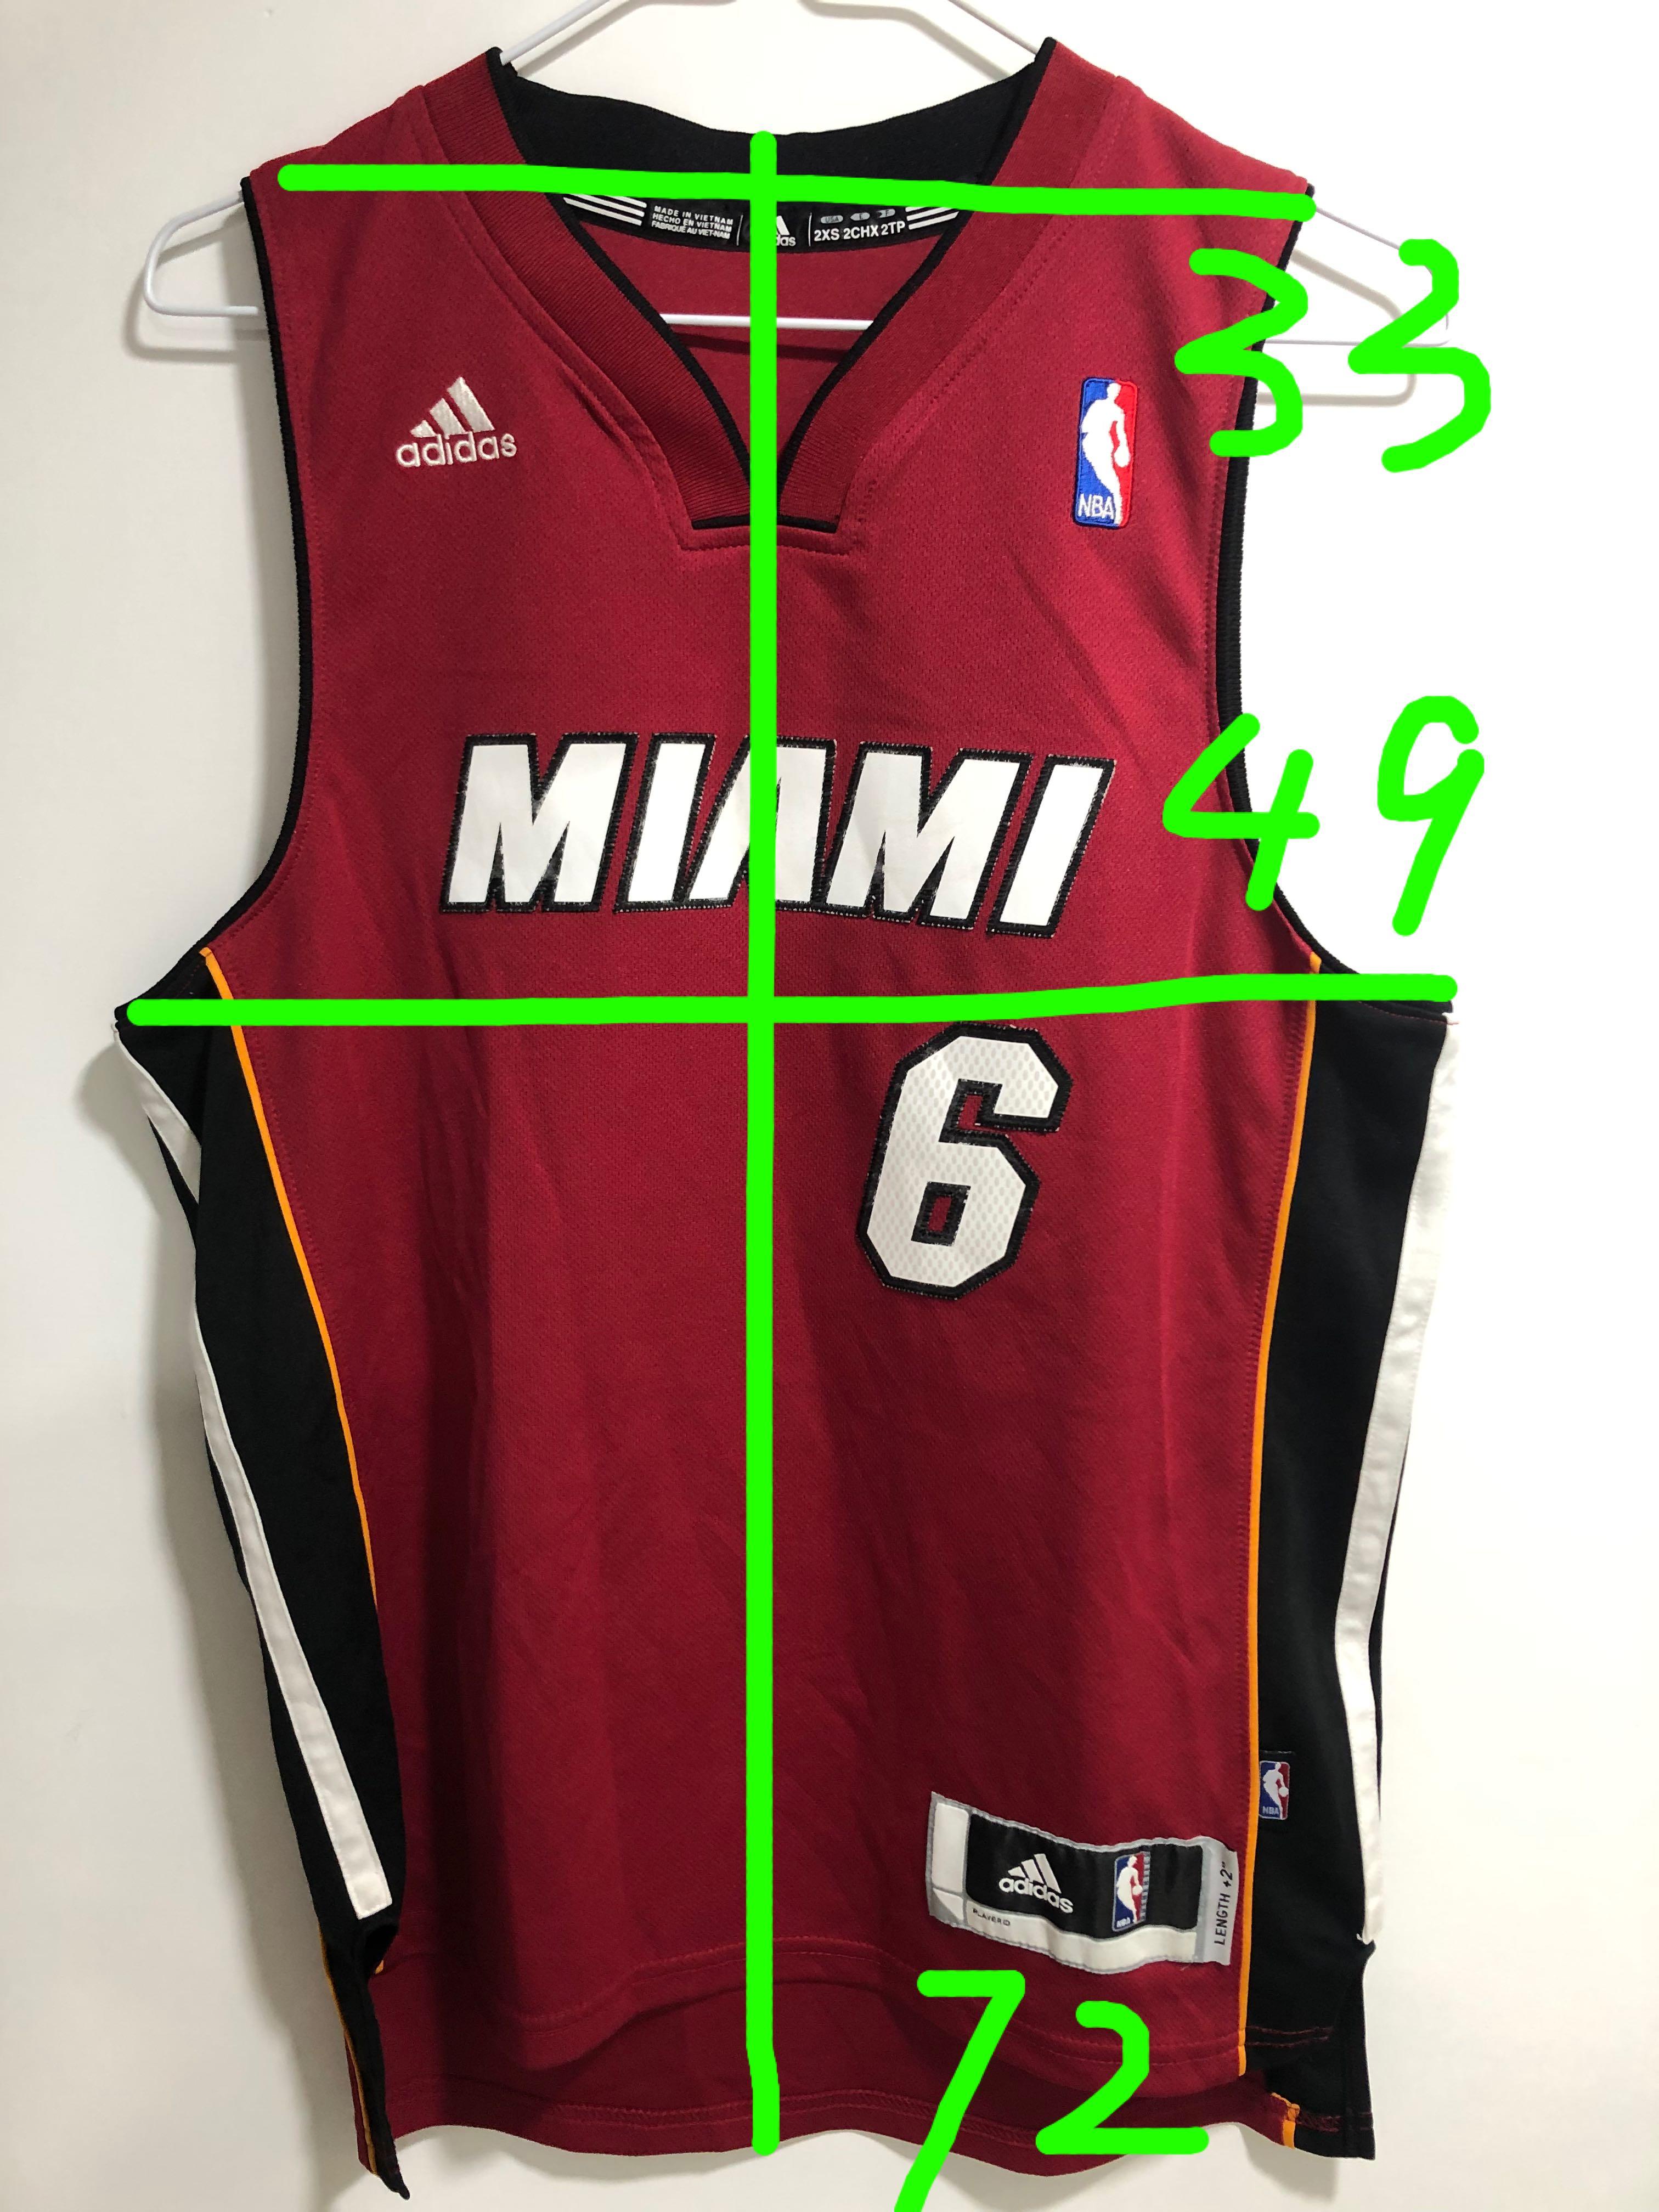  LeBron James Autographed Miami Heat Jersey Number